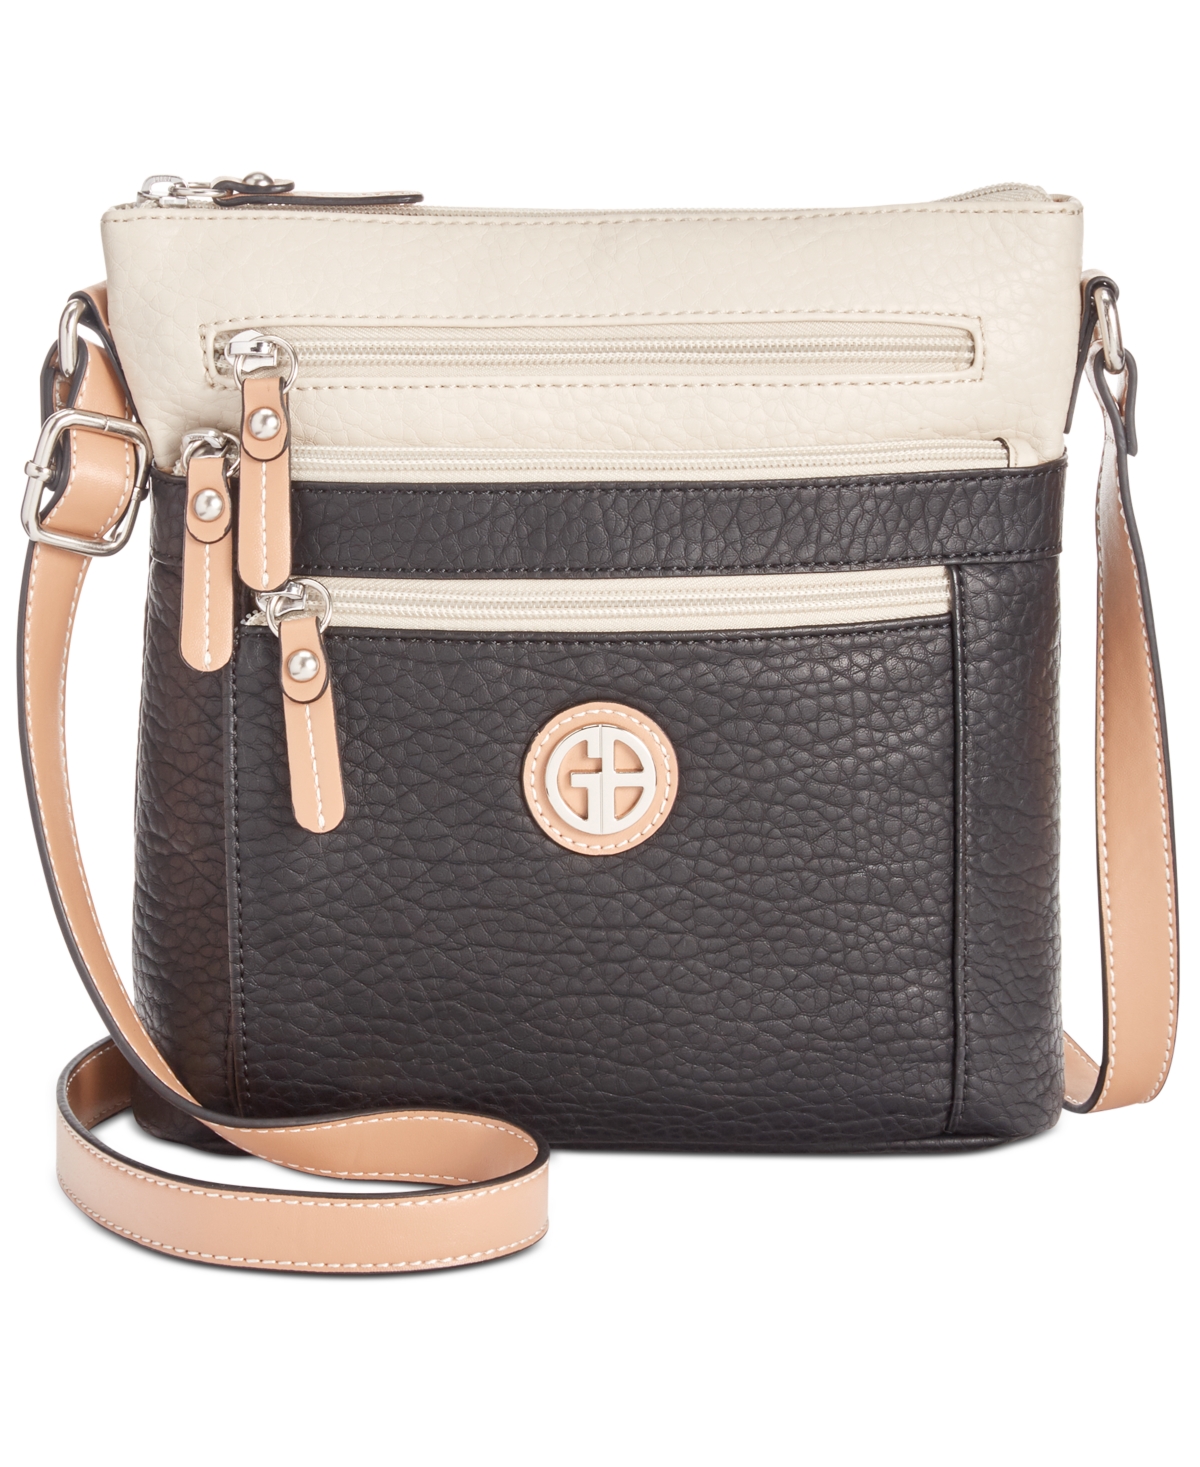 Colorblock Pebble Crossbody, Created for Macy's - Black/Ivory/Silver